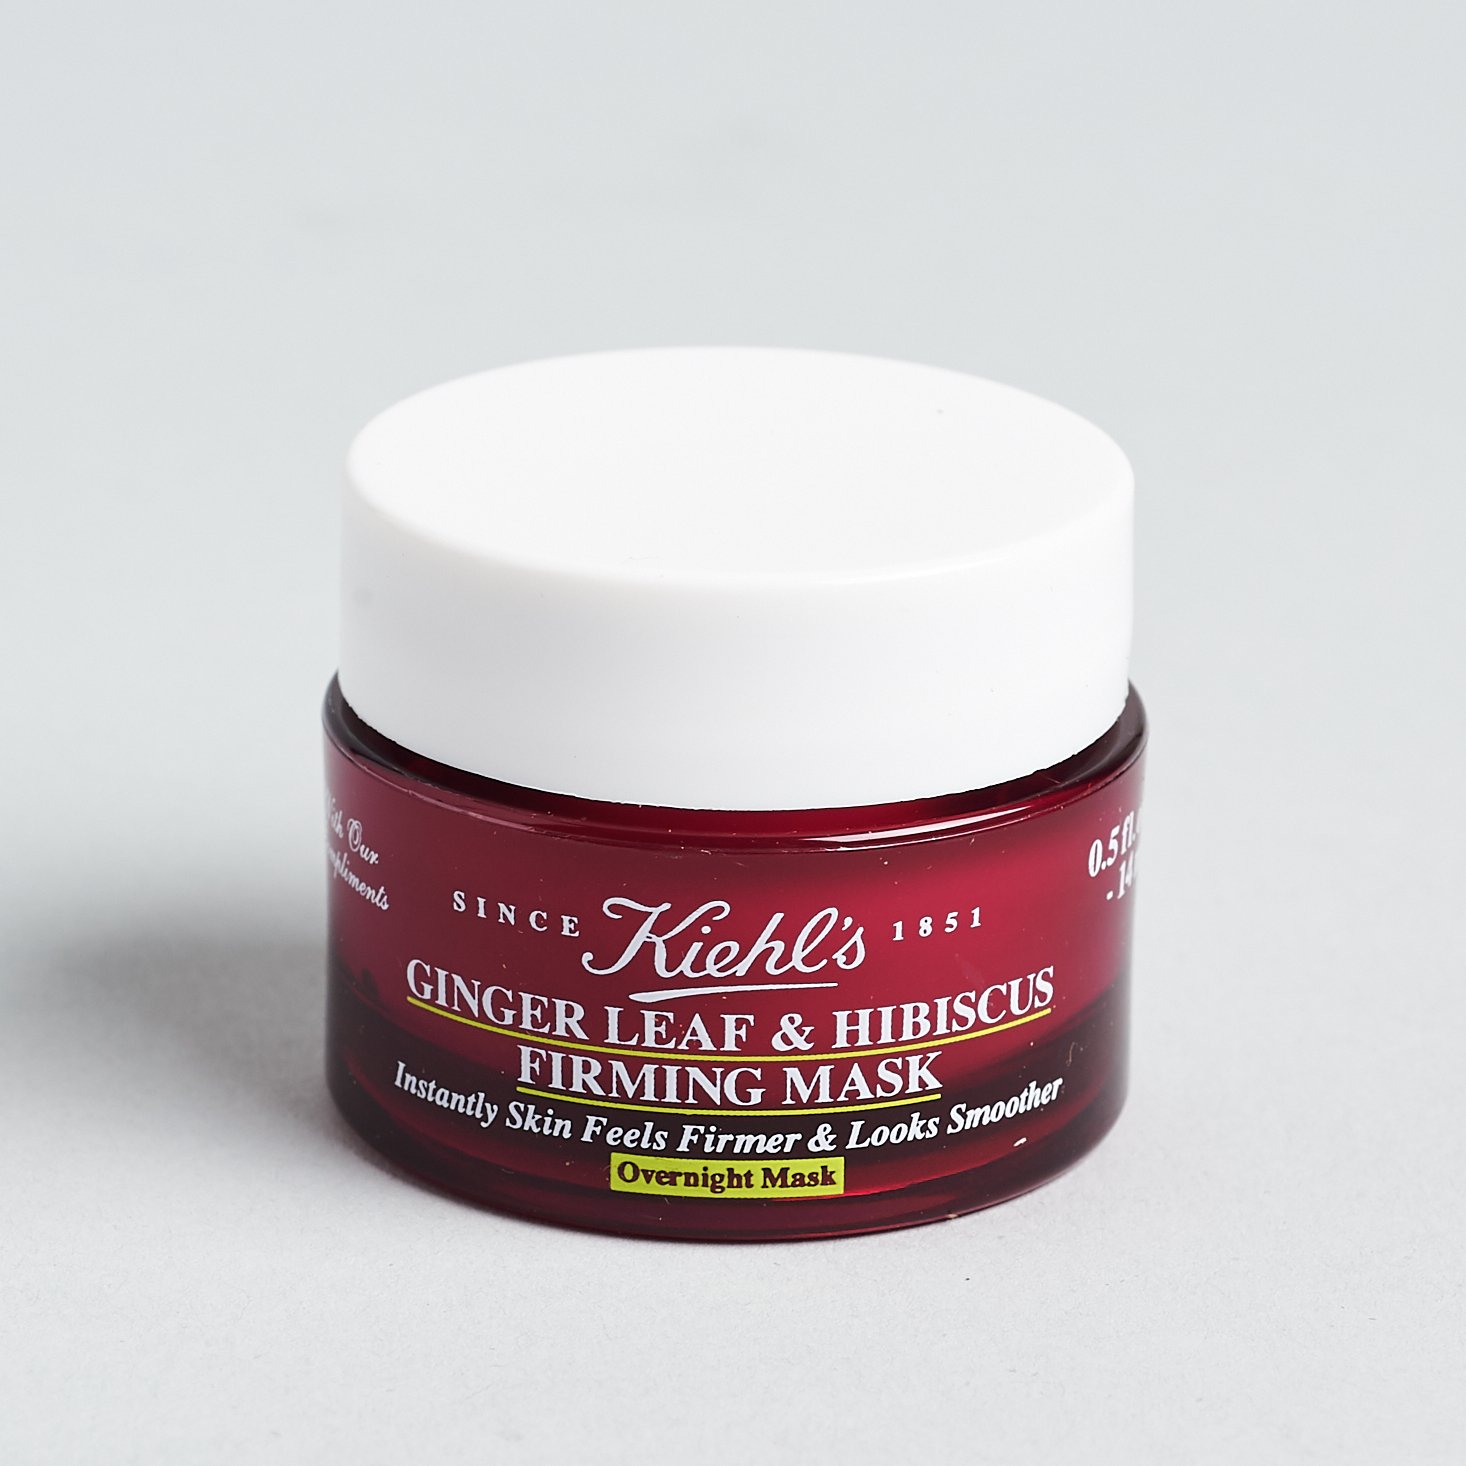 kiehls mask in berry colored pot with white lid